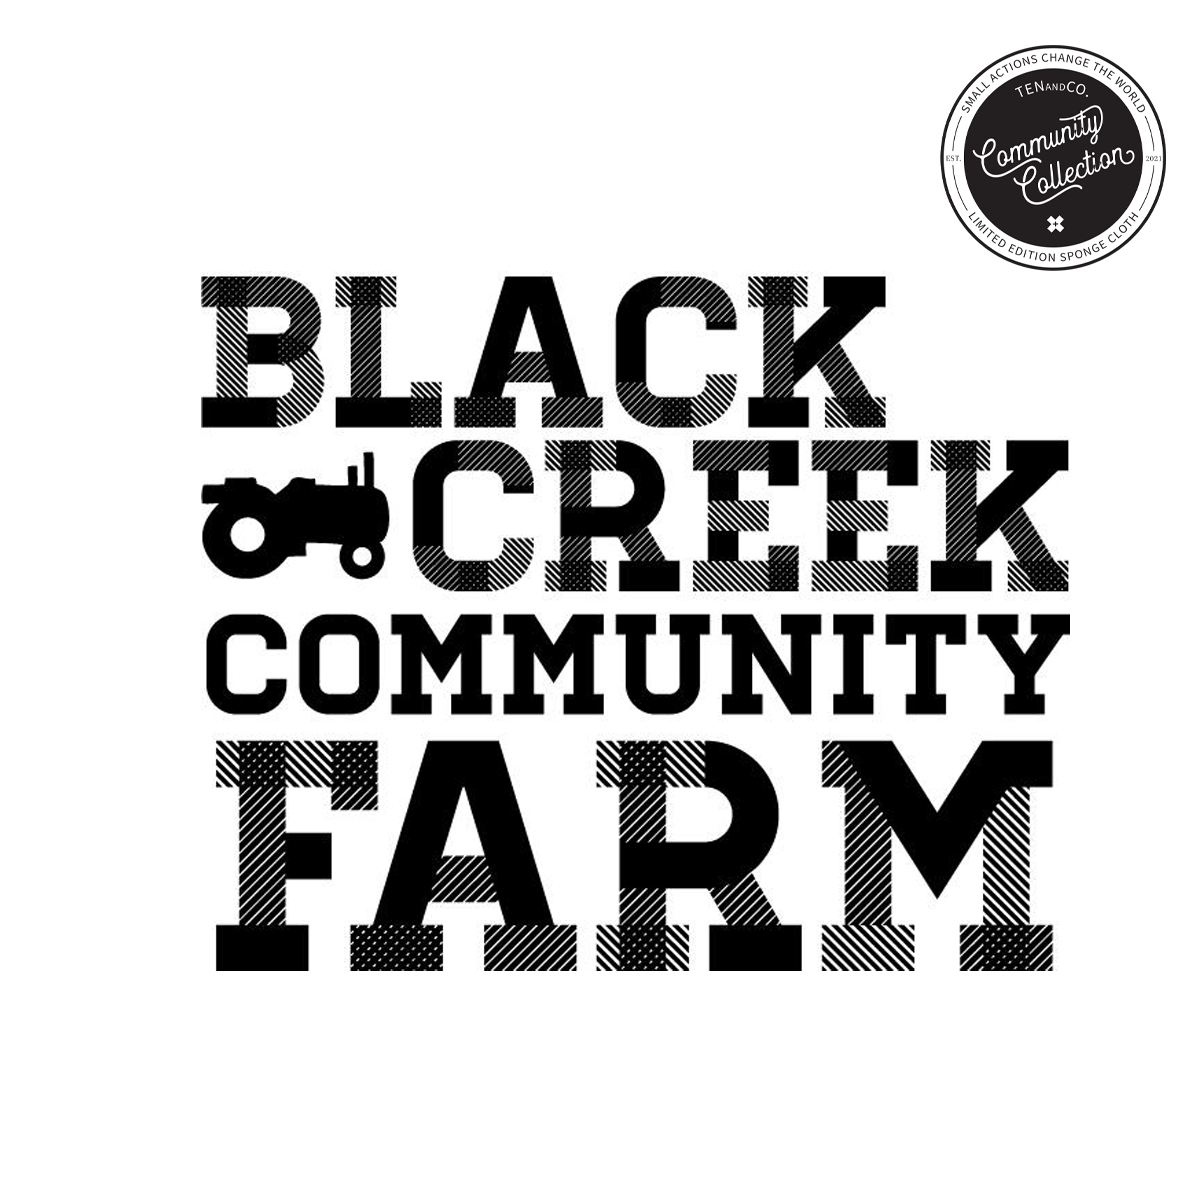 Image of The Black Creek Community Farm logo in black font. There is a little black animated tractor beside Creek. In the top right corner is the “Community Collection” logo. 